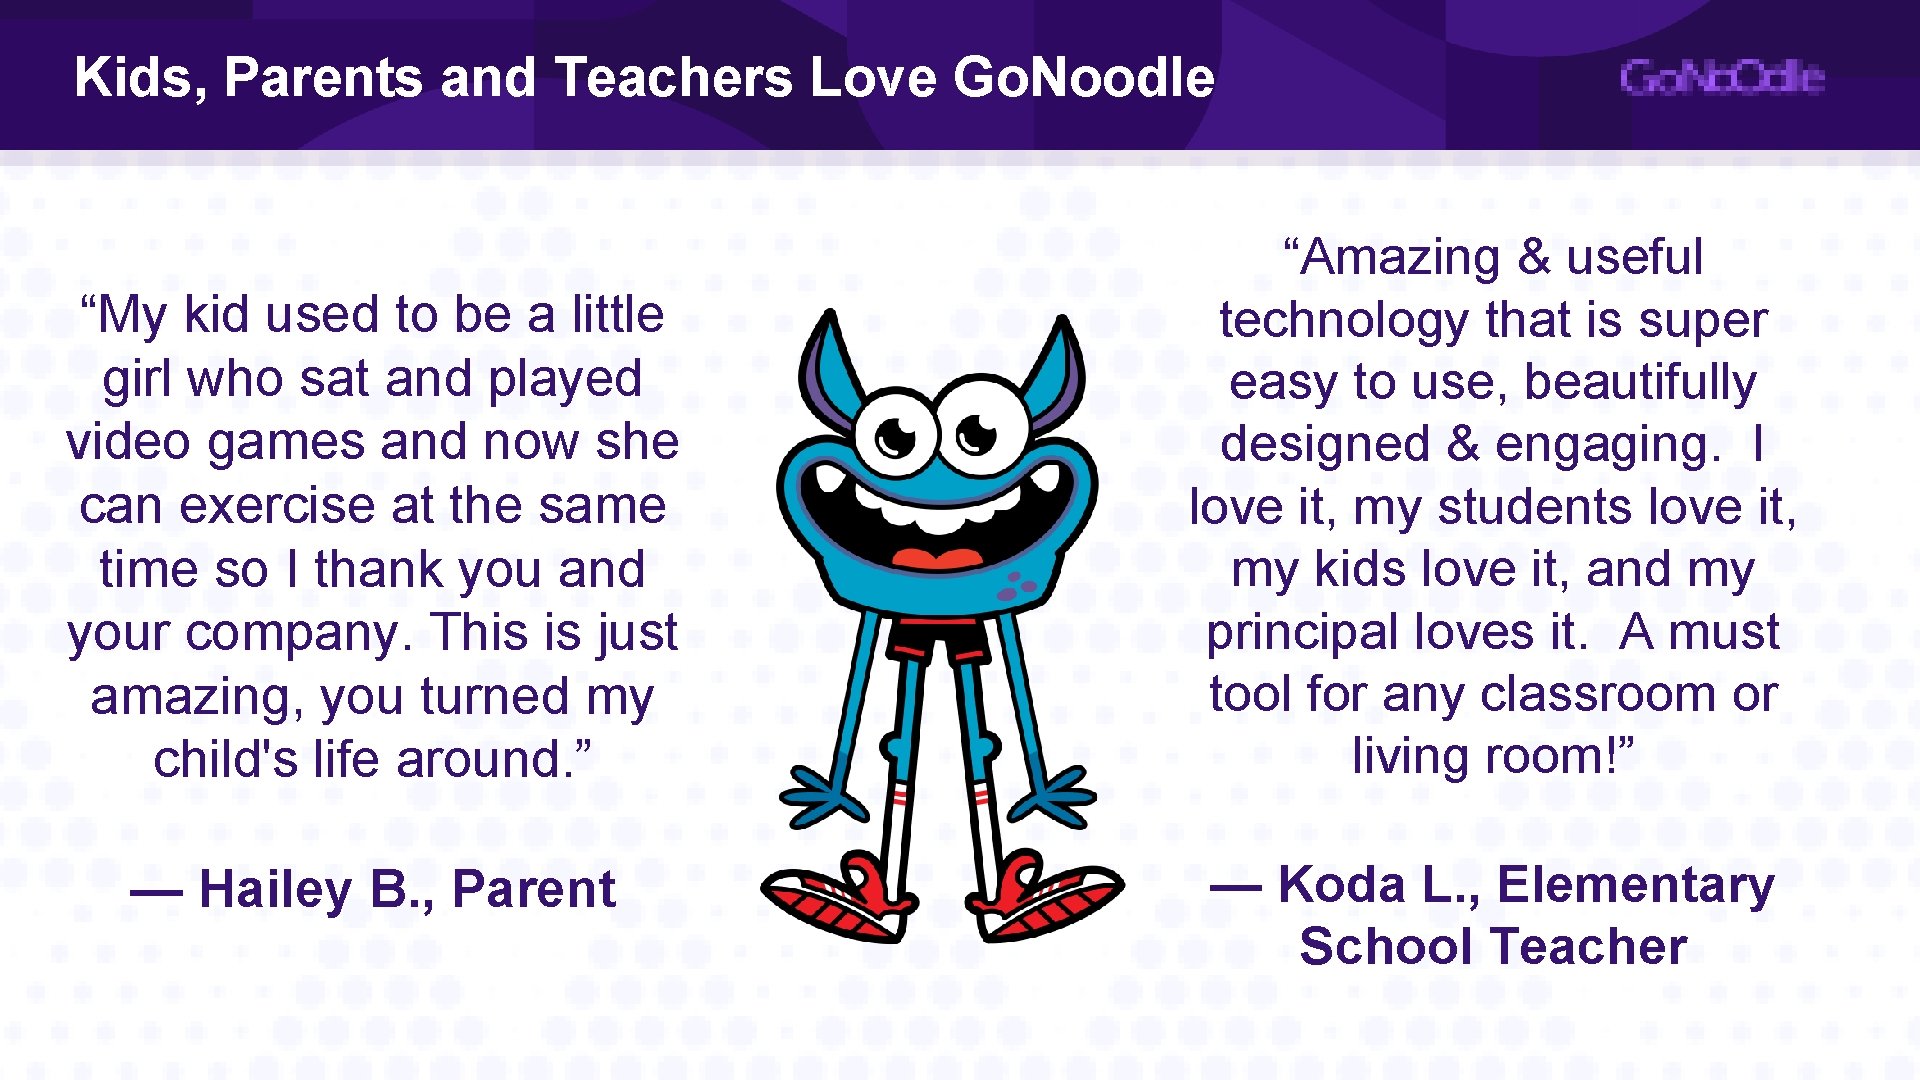 Kids, Parents and Teachers Love Go. Noodle “My kid used to be a little